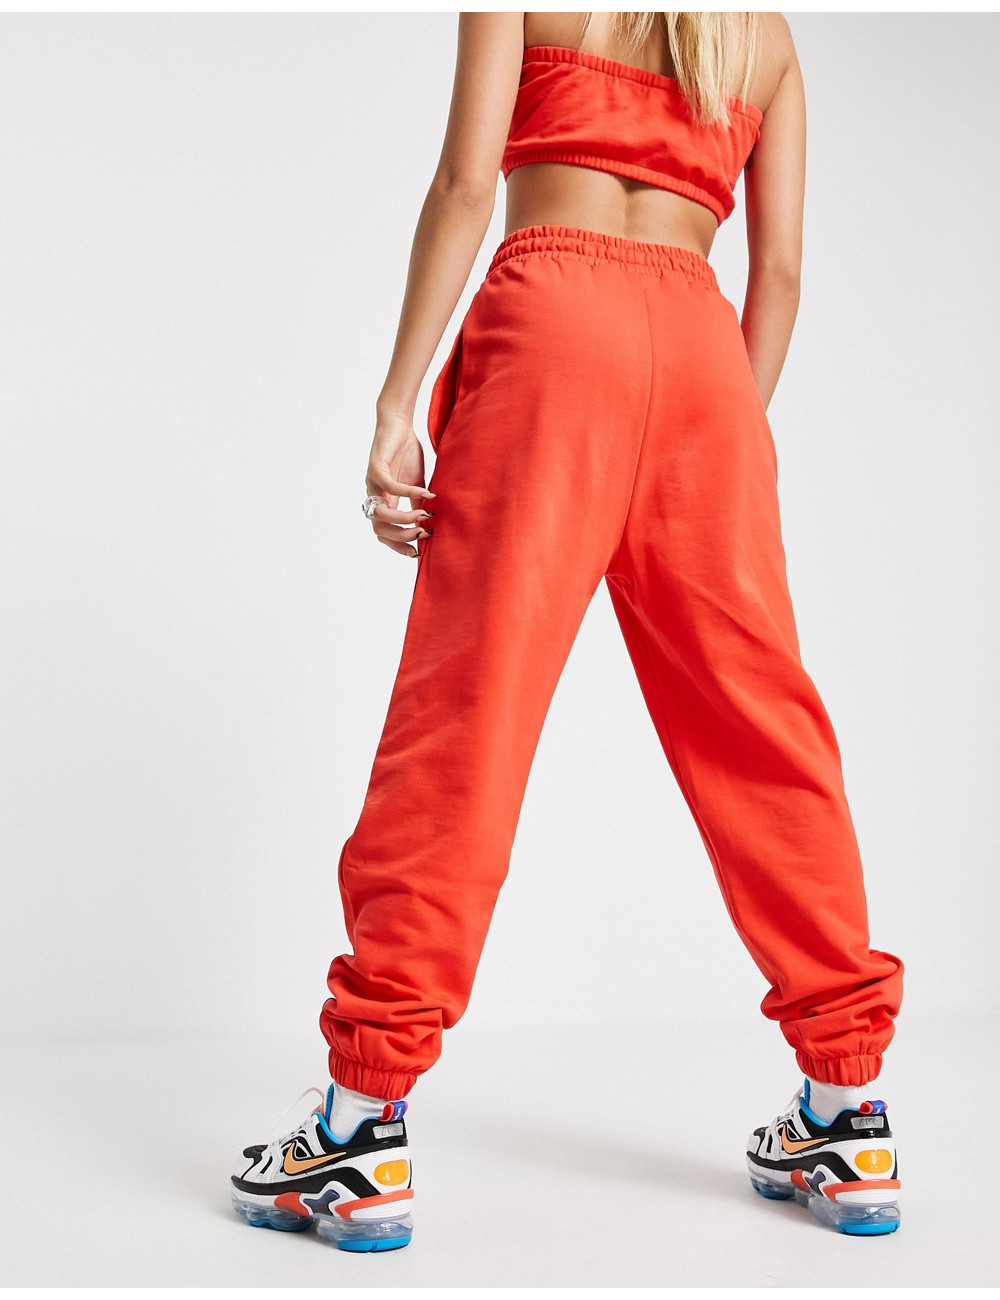 COLLUSION red jogger co-ord